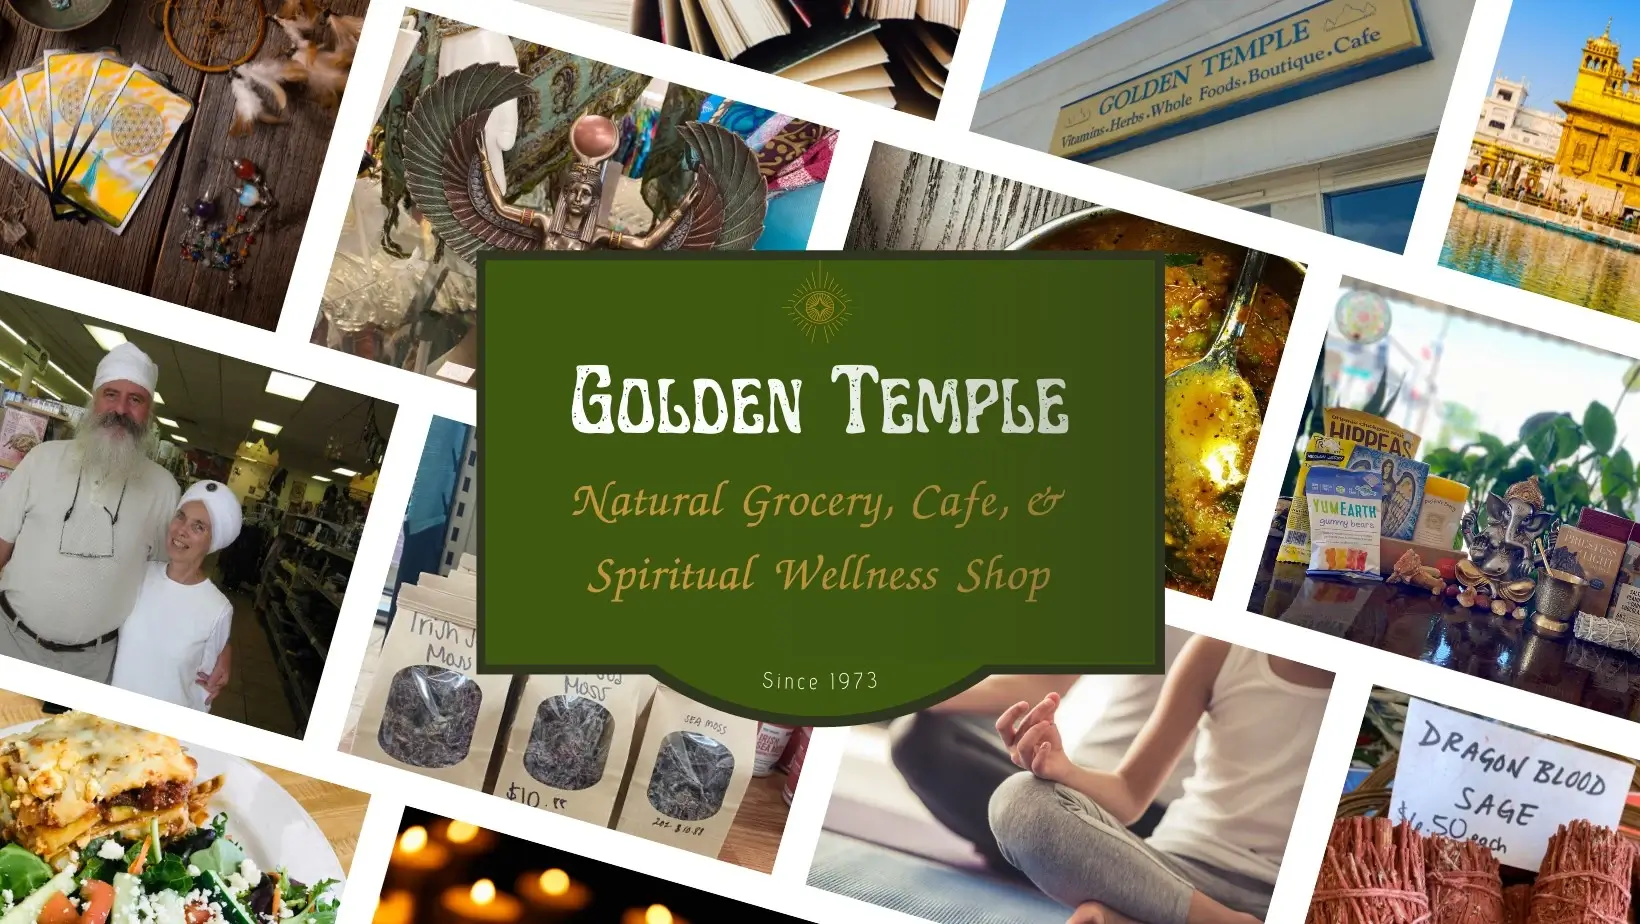 Collage of images with text that reads: Golden Temple: Natural grocery, cafe, & spiritual wellness shop since 1973